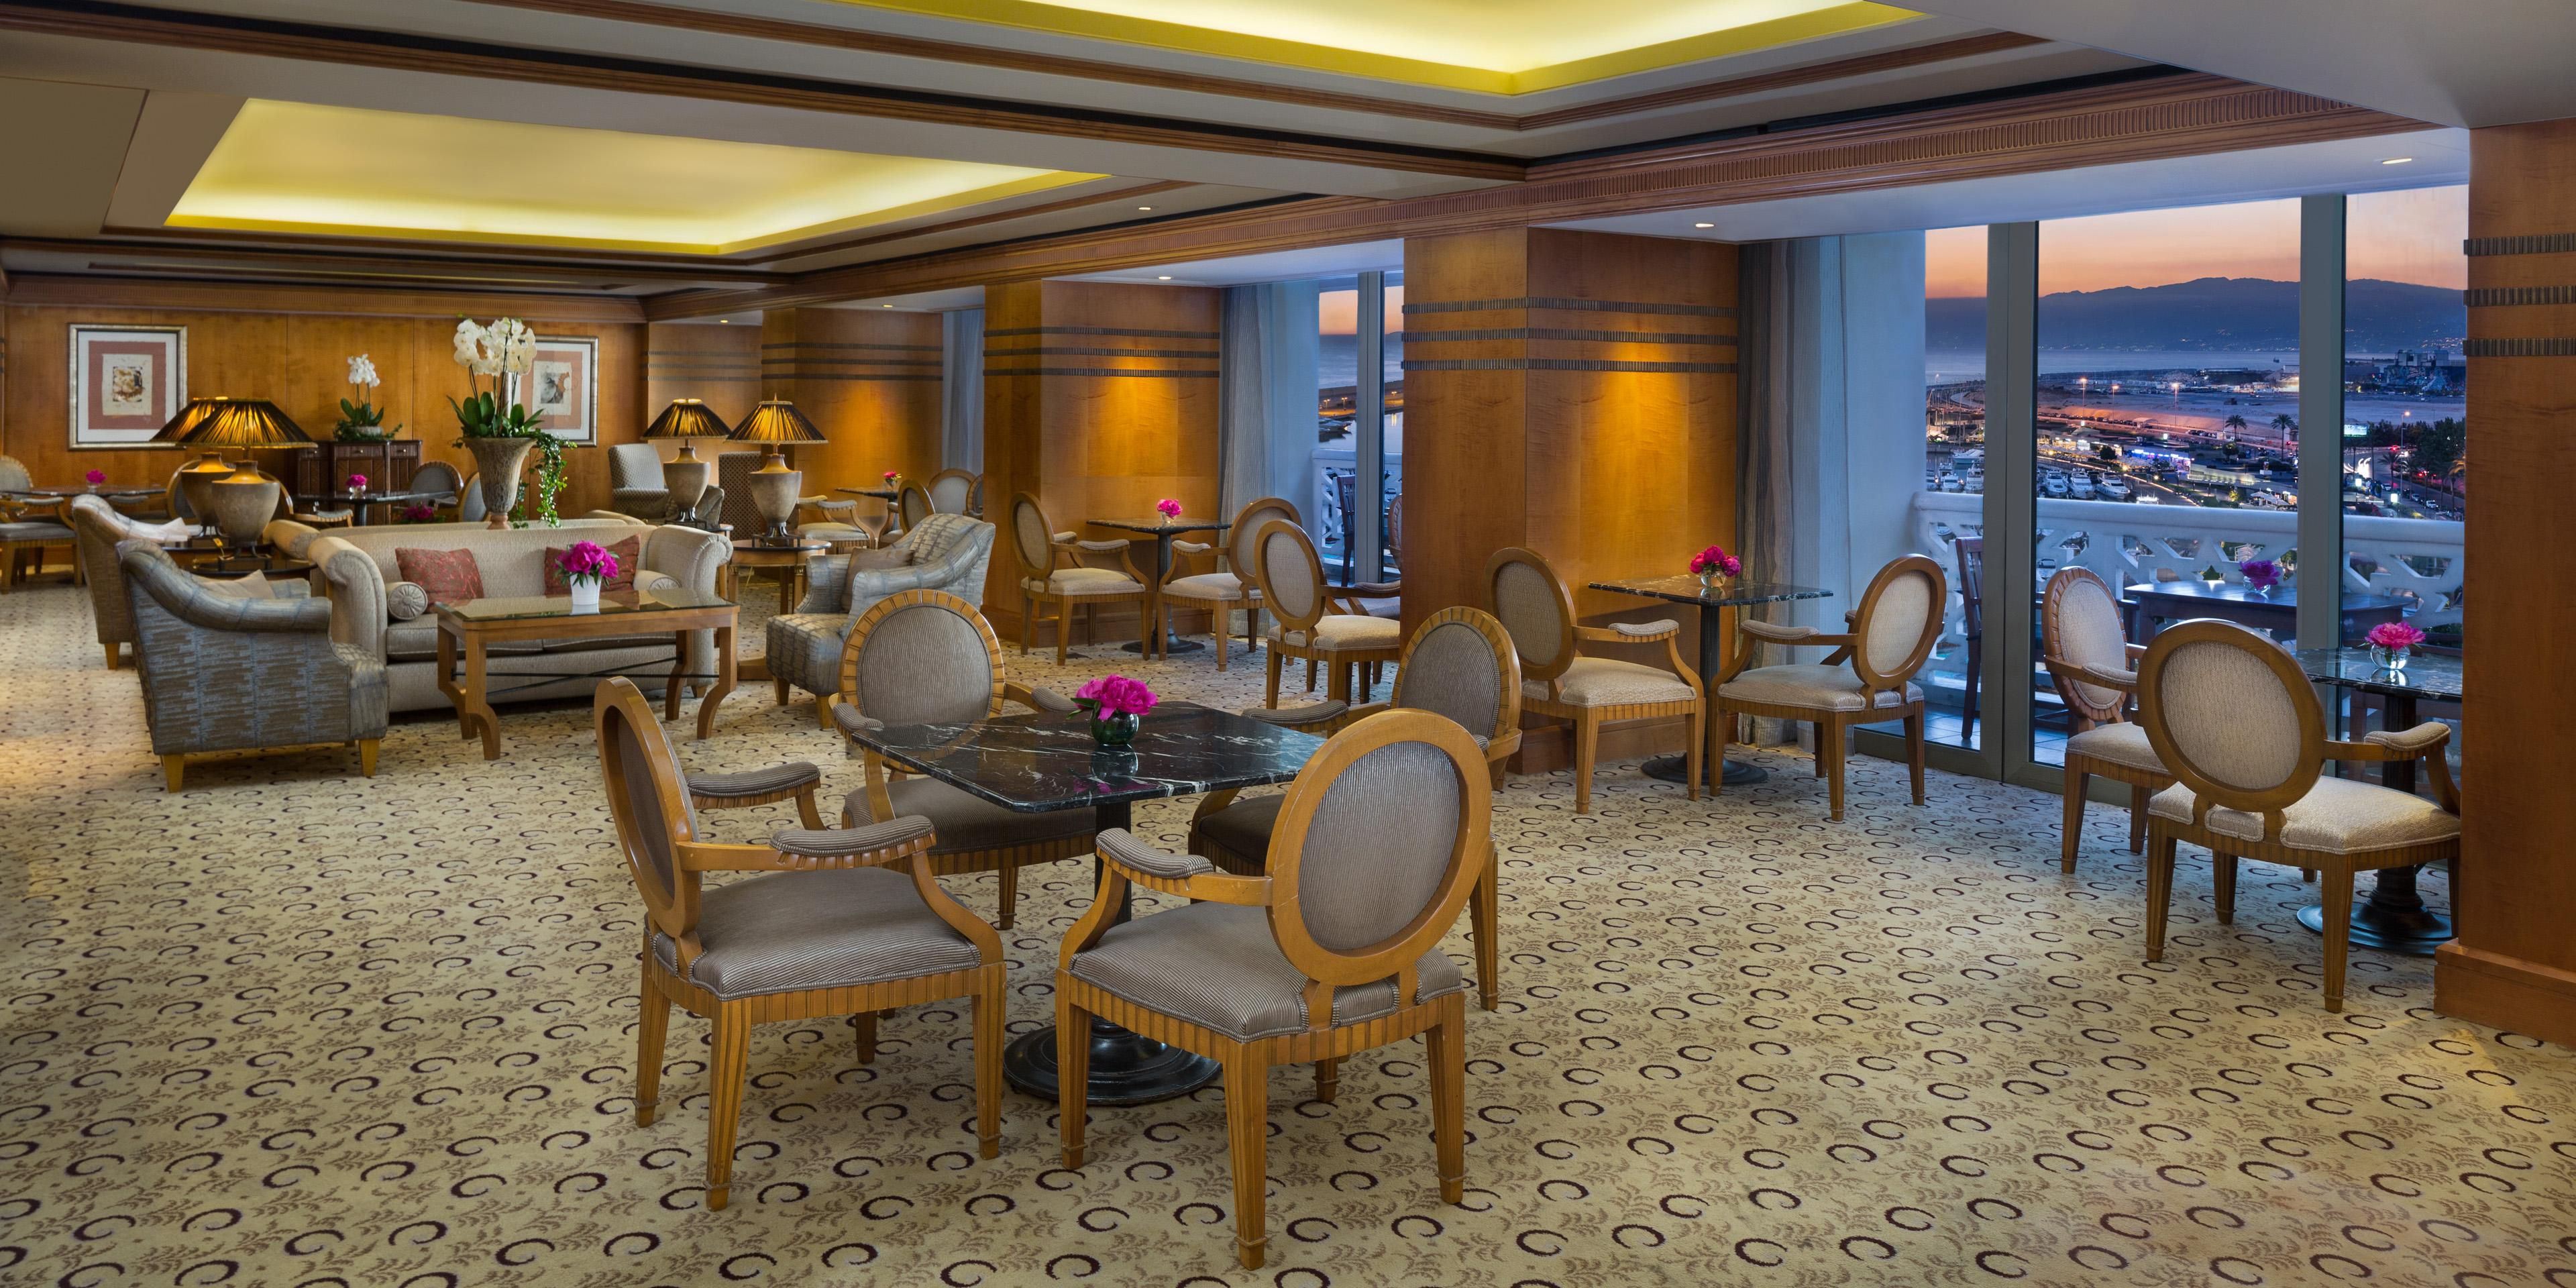 Club Phoenicia offers guests exclusive access to the Club lounge with special facilities and services. Become a Club Phoenicia member today.